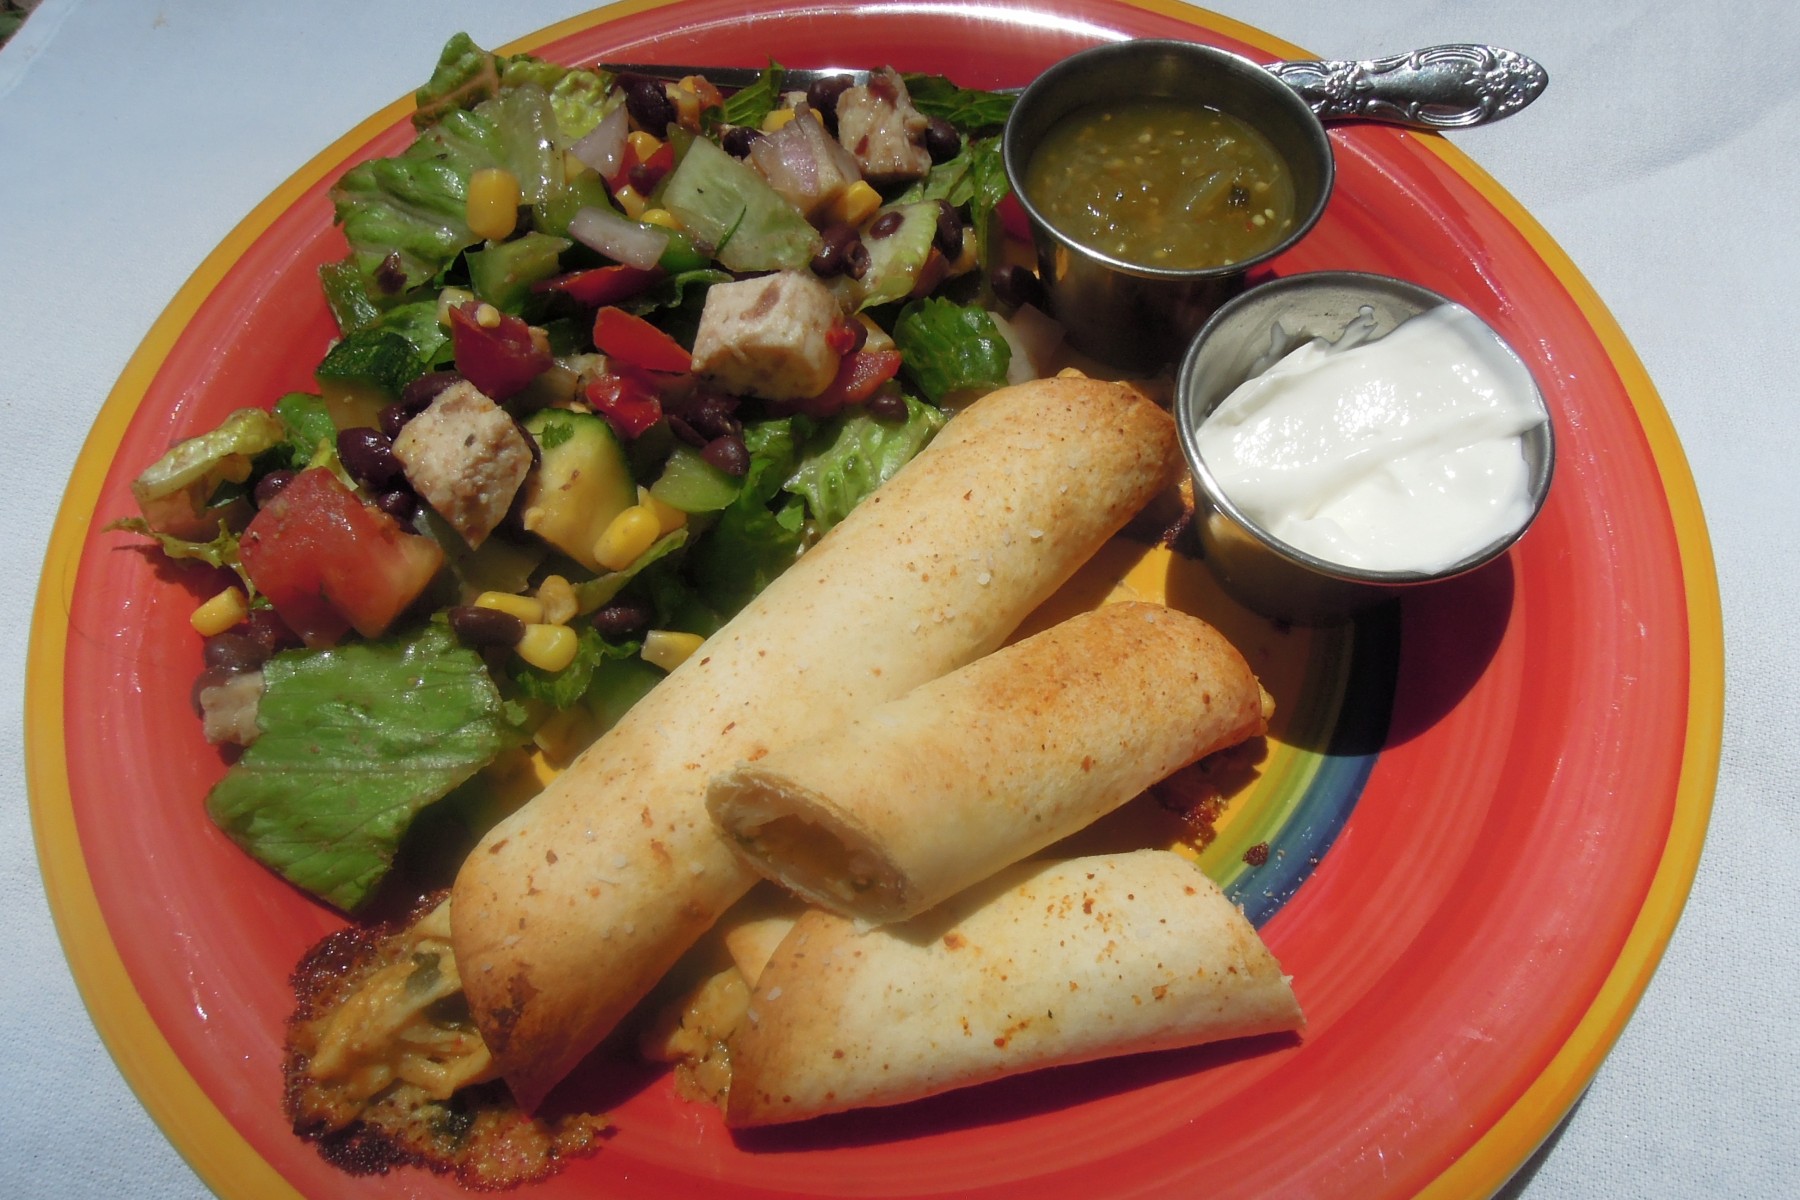 Baked chicken taquitos